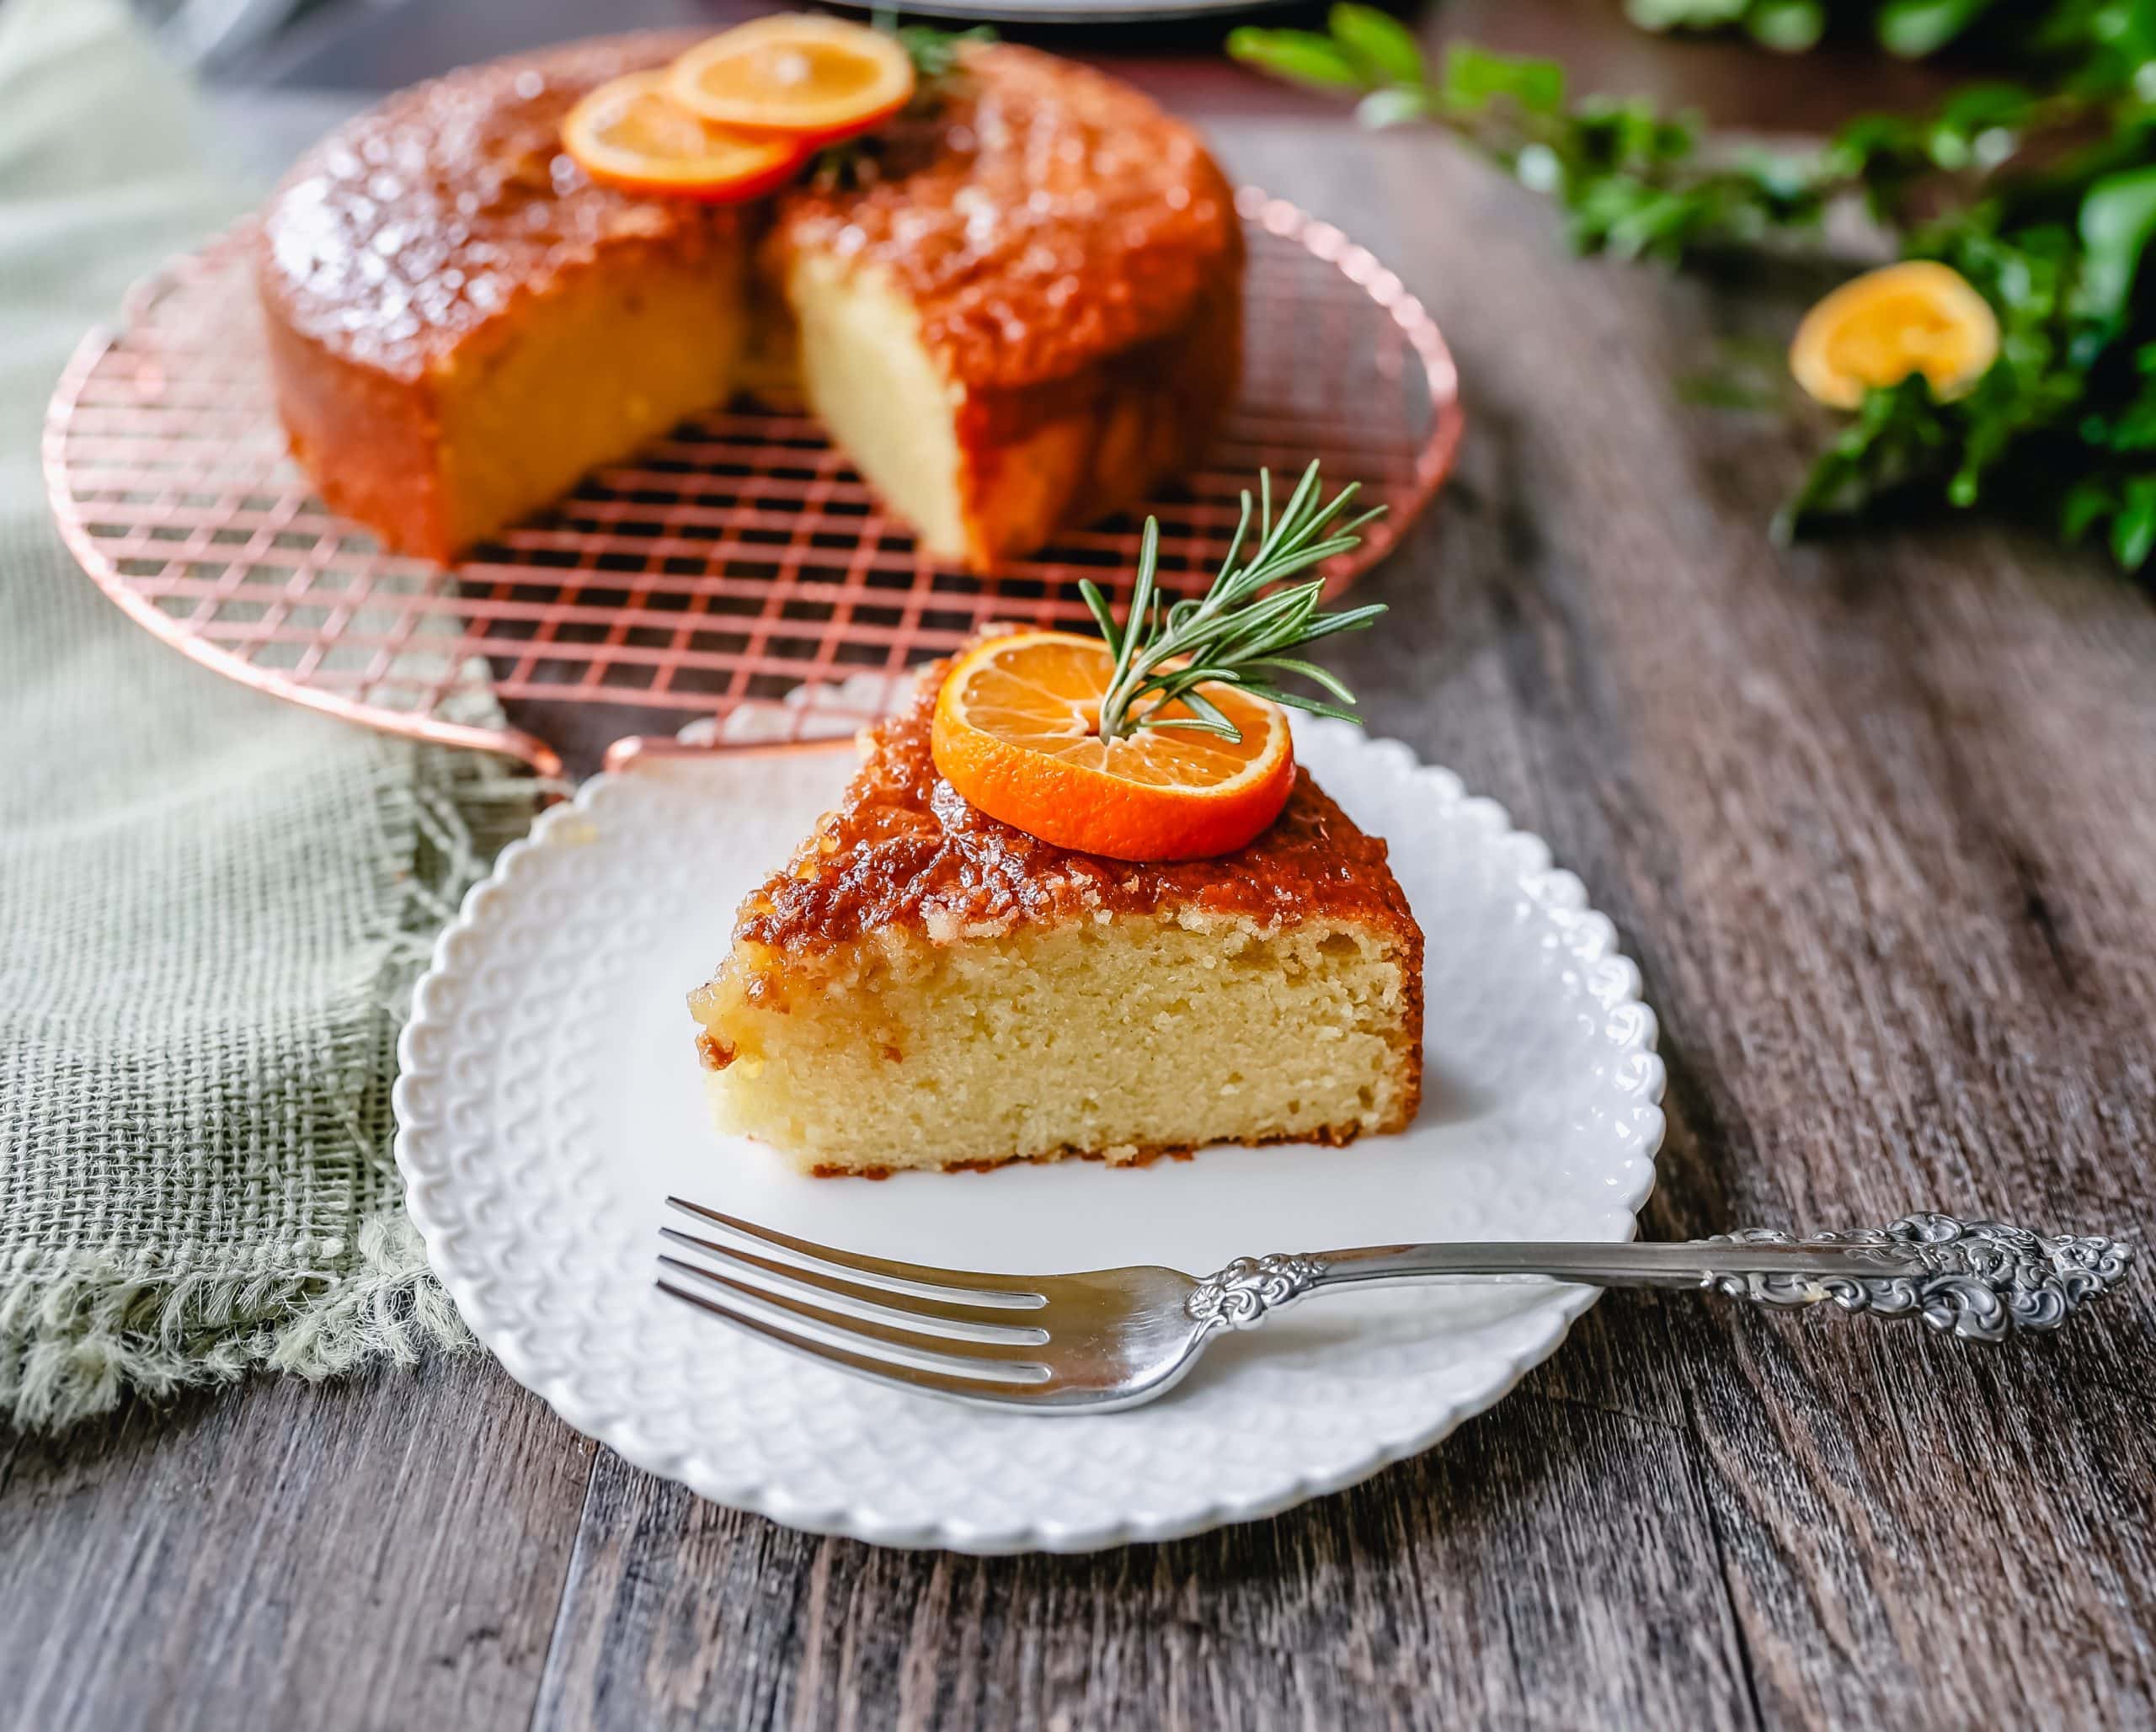 Olive Oil Cake A homemade olive oil cake with vanilla and almond extracts and topped with a glaze. This vanilla olive oil cake is the perfect simple dessert. 